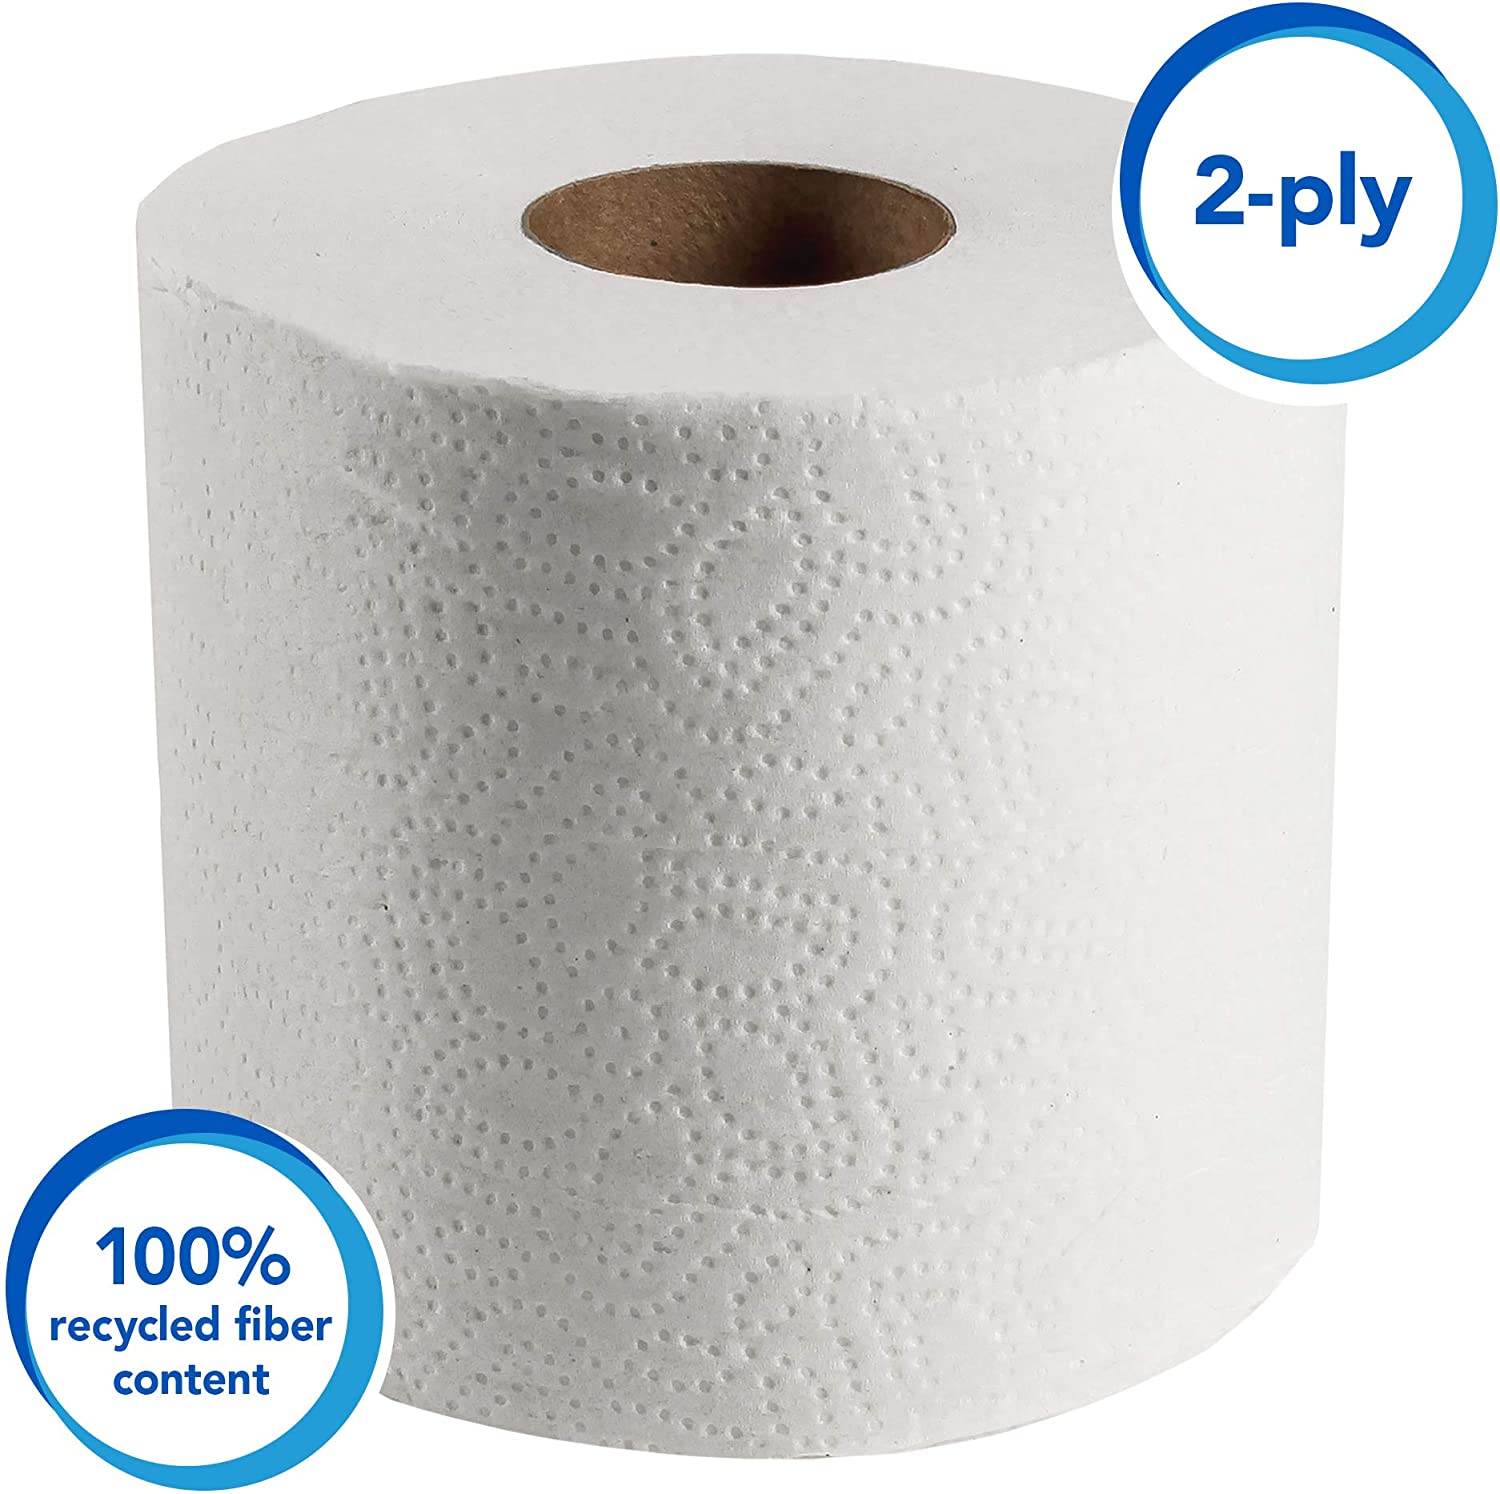 Scott Essential Professional 100% Recycled Fiber Bulk Toilet Paper for Business (13217), 2-PLY Standard Rolls, White, 80 Rolls / Case, 506 Sheets / Roll